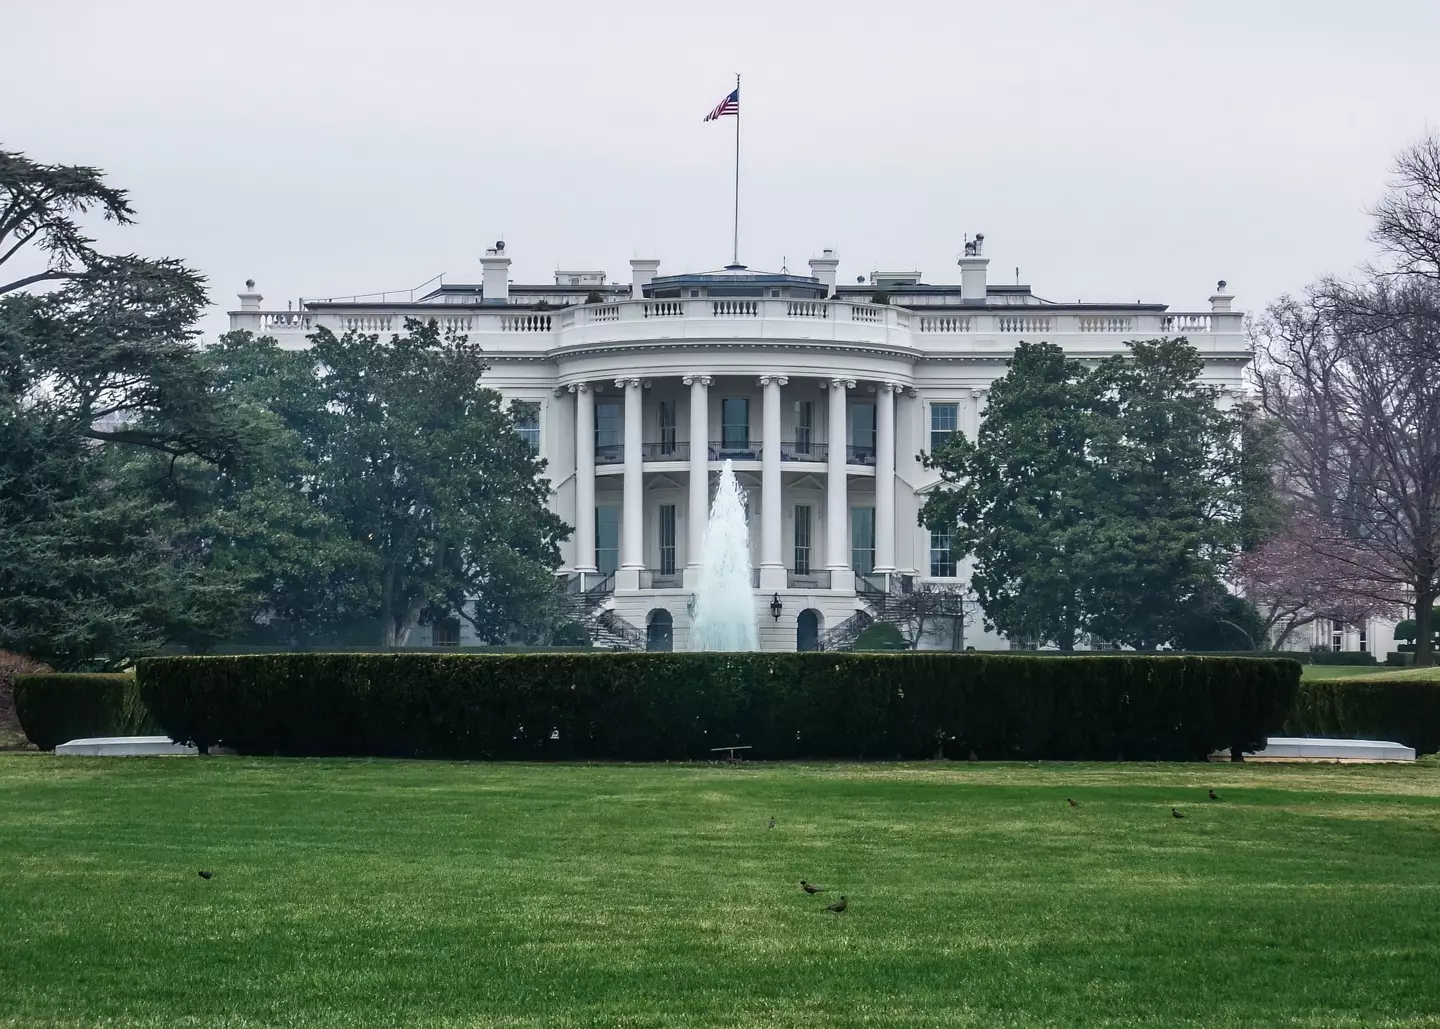 Emergency crews rushed to The White House.